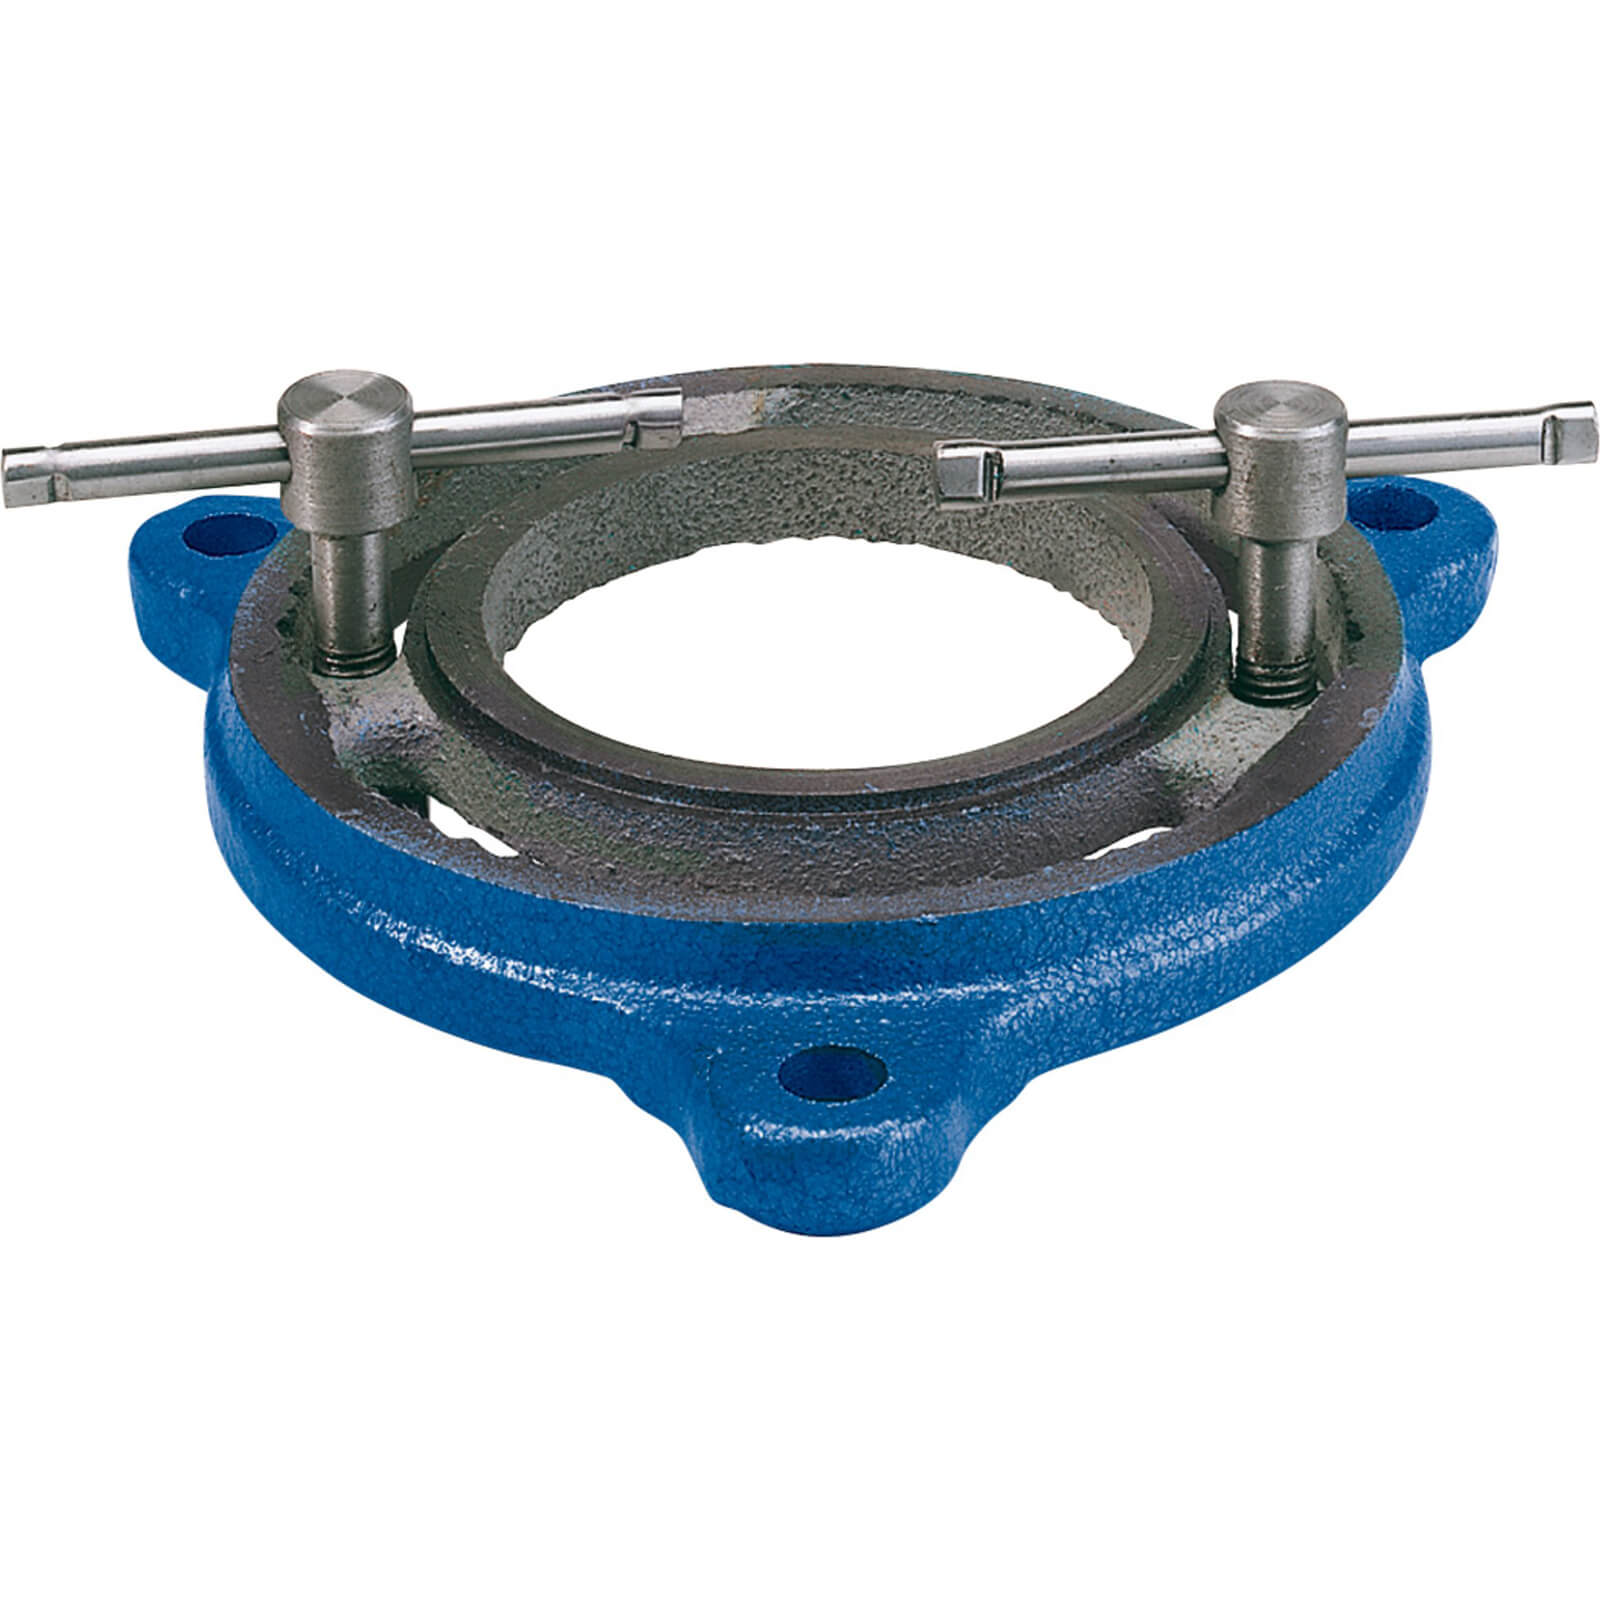 Image of Draper Swivel Base for 44506 Engineers Bench Vice